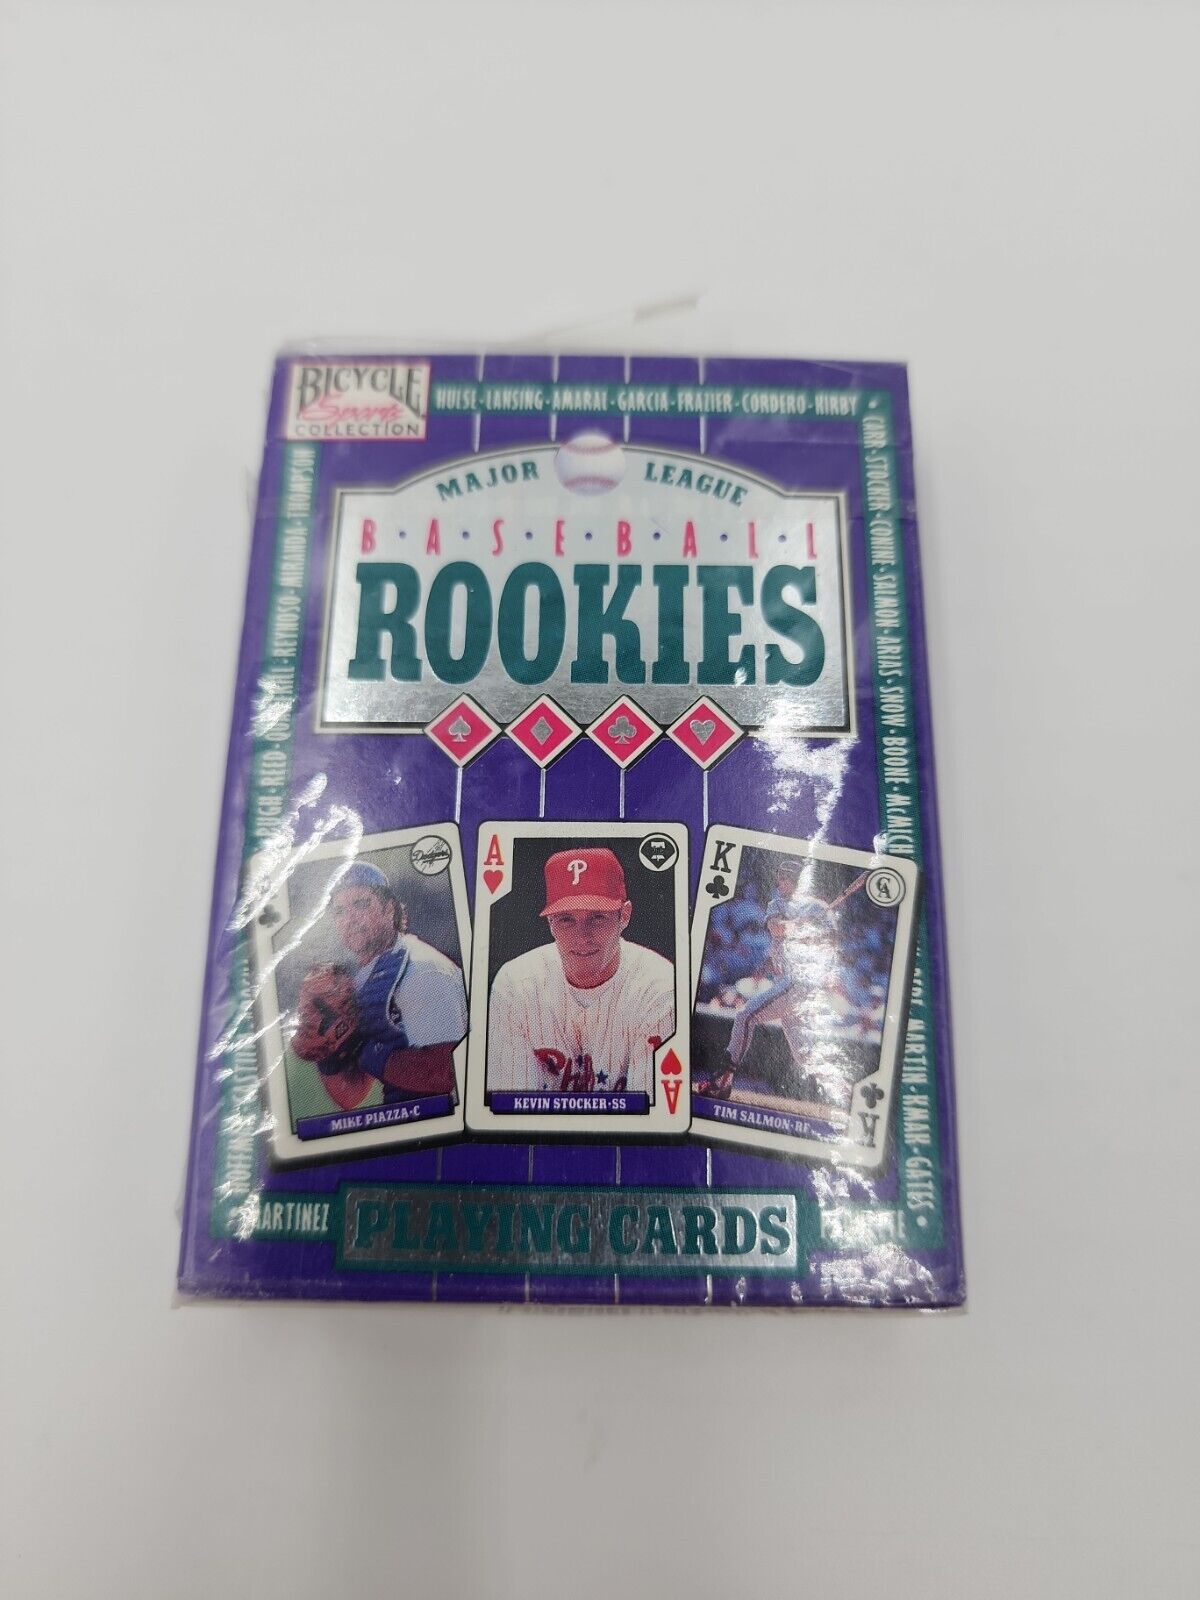 1993 Baseball ACES Playing Cards Poker Deck SEALED Bicycle Sports PURPLE Pack